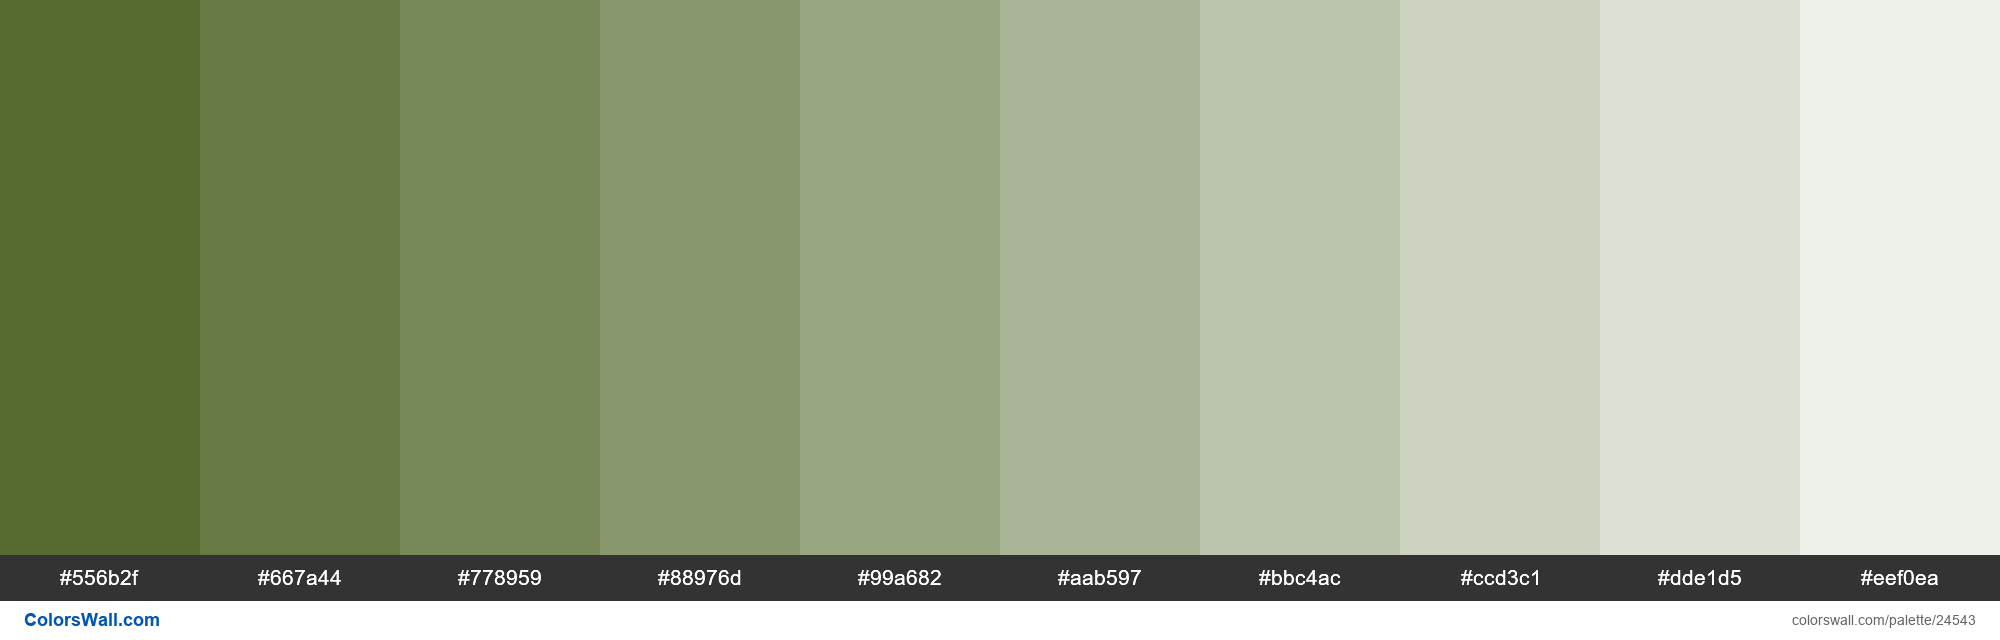 colorswall on X: Tints of Dark Olive Green #556B2F hex color #556b2f,  #667a44, #778959, #88976d, #99a682, #aab597, #bbc4ac, #ccd3c1, #dde1d5,  #eef0ea #colors #palette   /  X